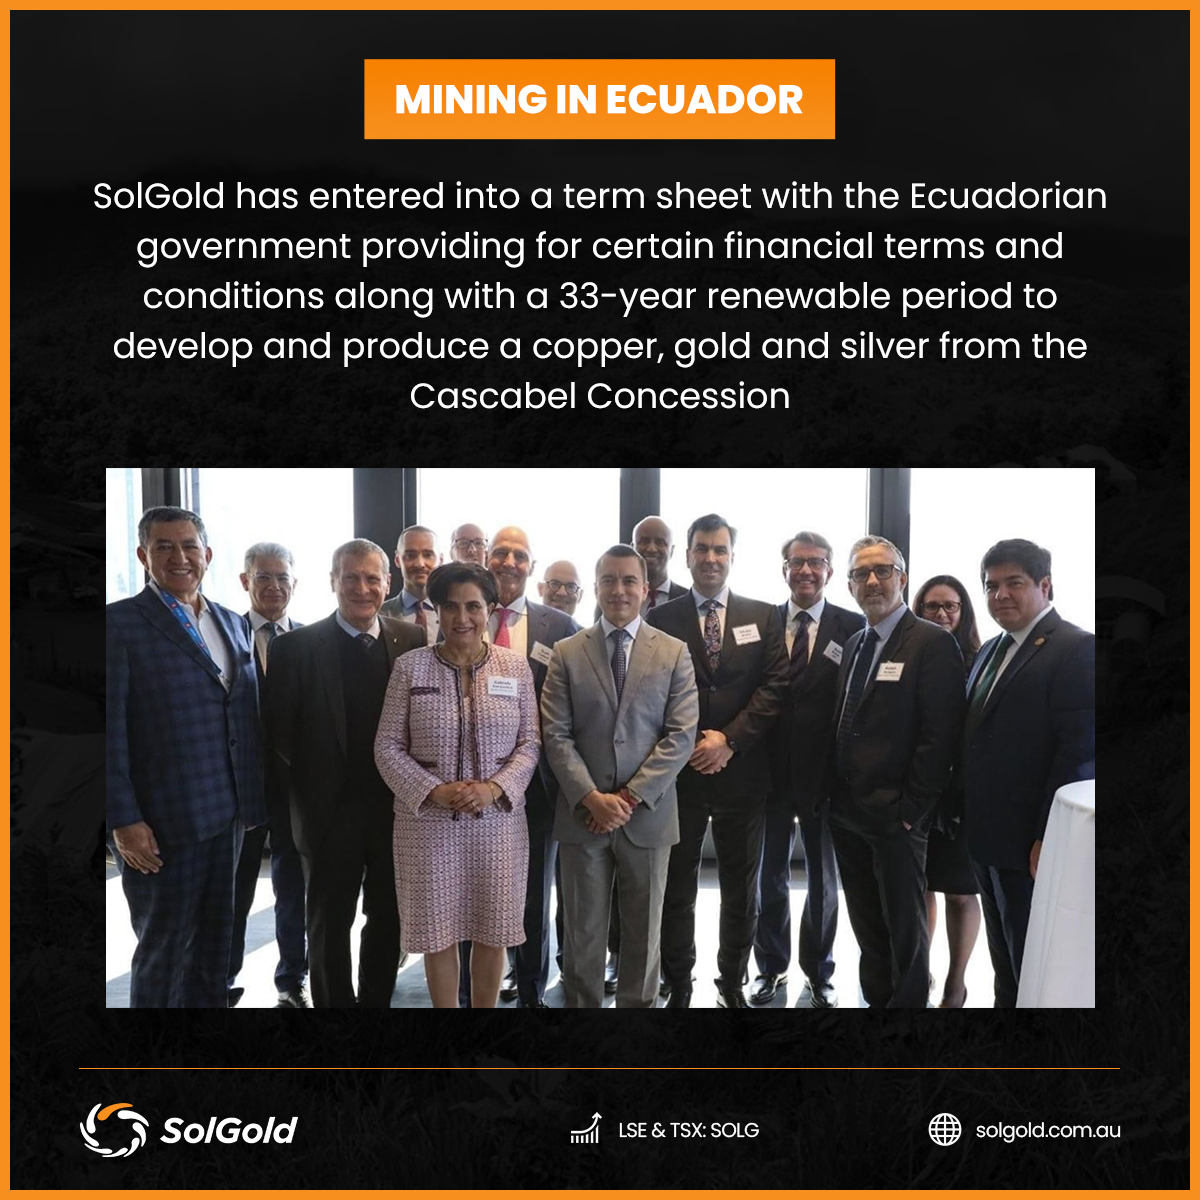 Mining in Ecuador

SolGold has entered into a term sheet with the Ecuadorian government providing for certain financial terms and conditions along with a 33-year renewable period to develop and produce a copper, gold and silver from the Cascabel Concession

LSE: SOLG
TSX: SOLG